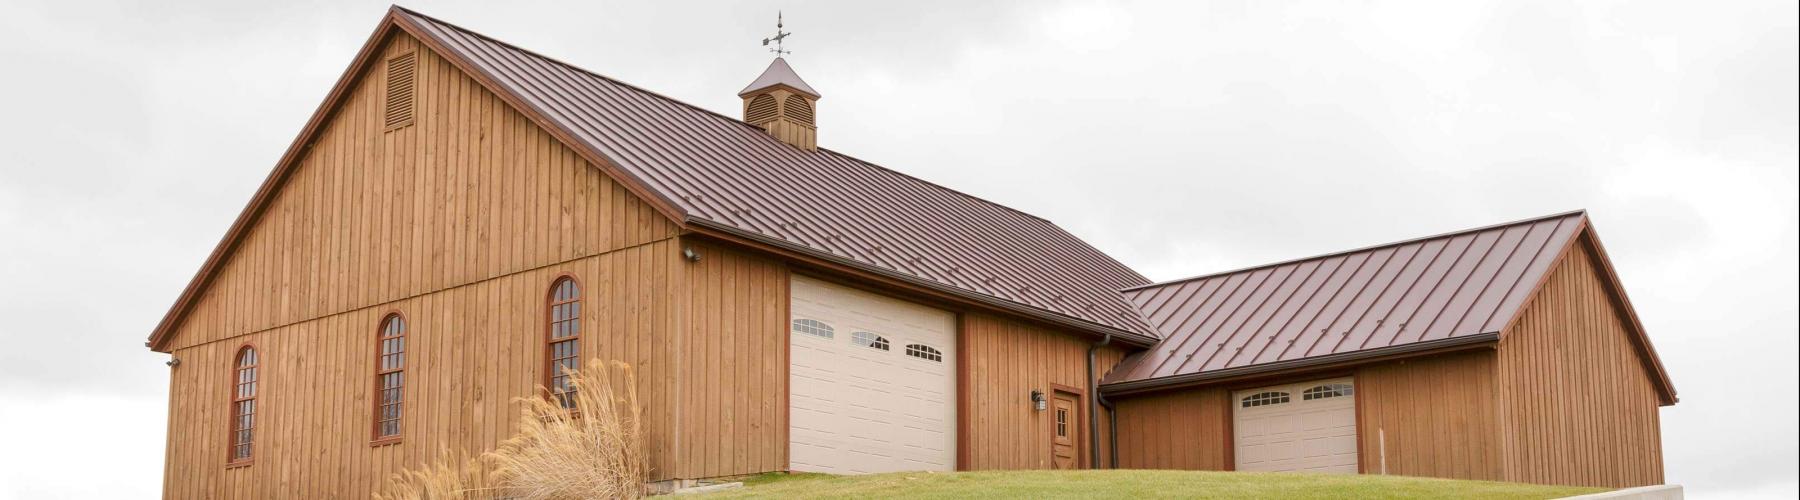 Bank Barn Builders Stable Hollow Construction